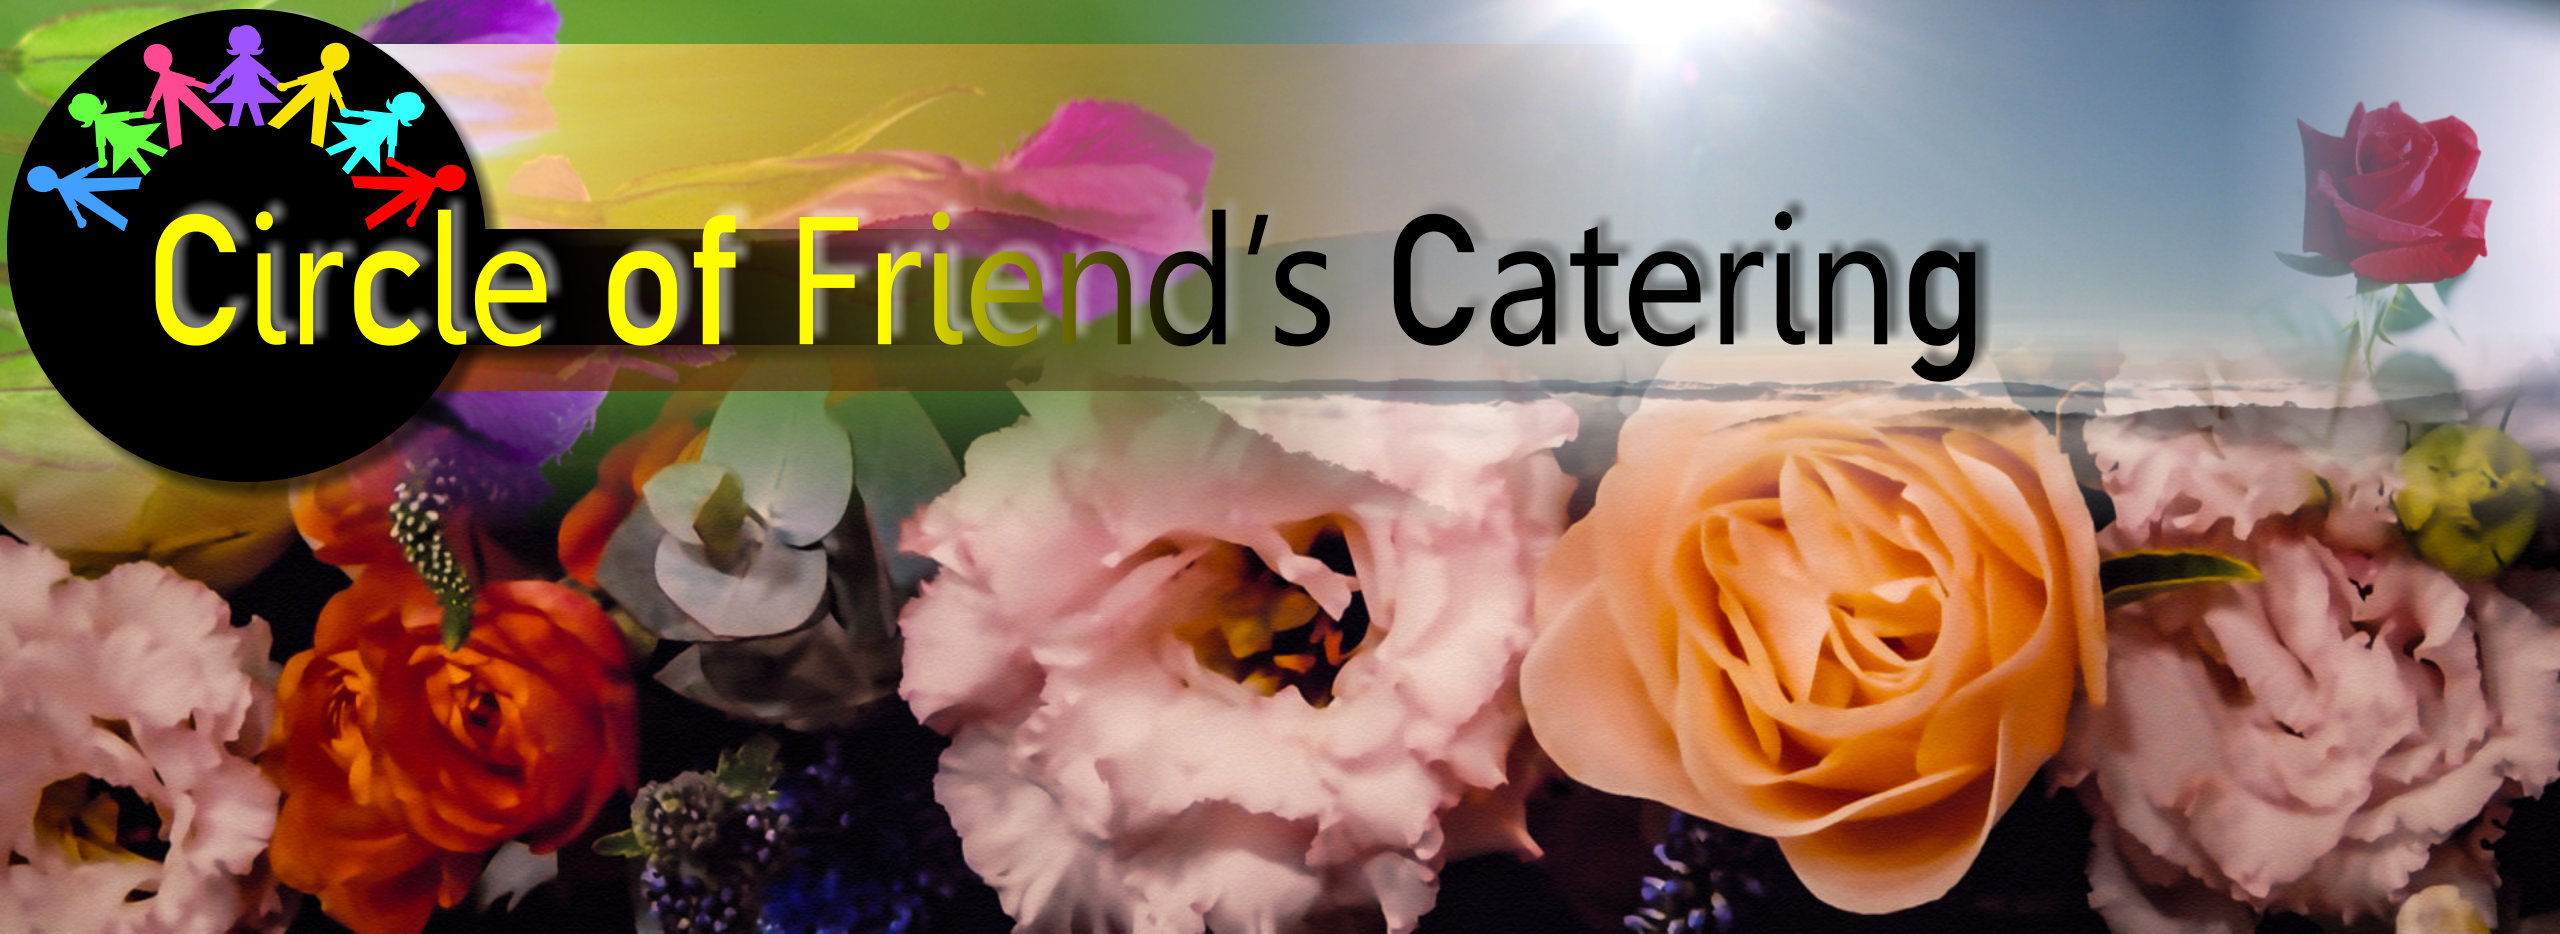 circle of friends catering services